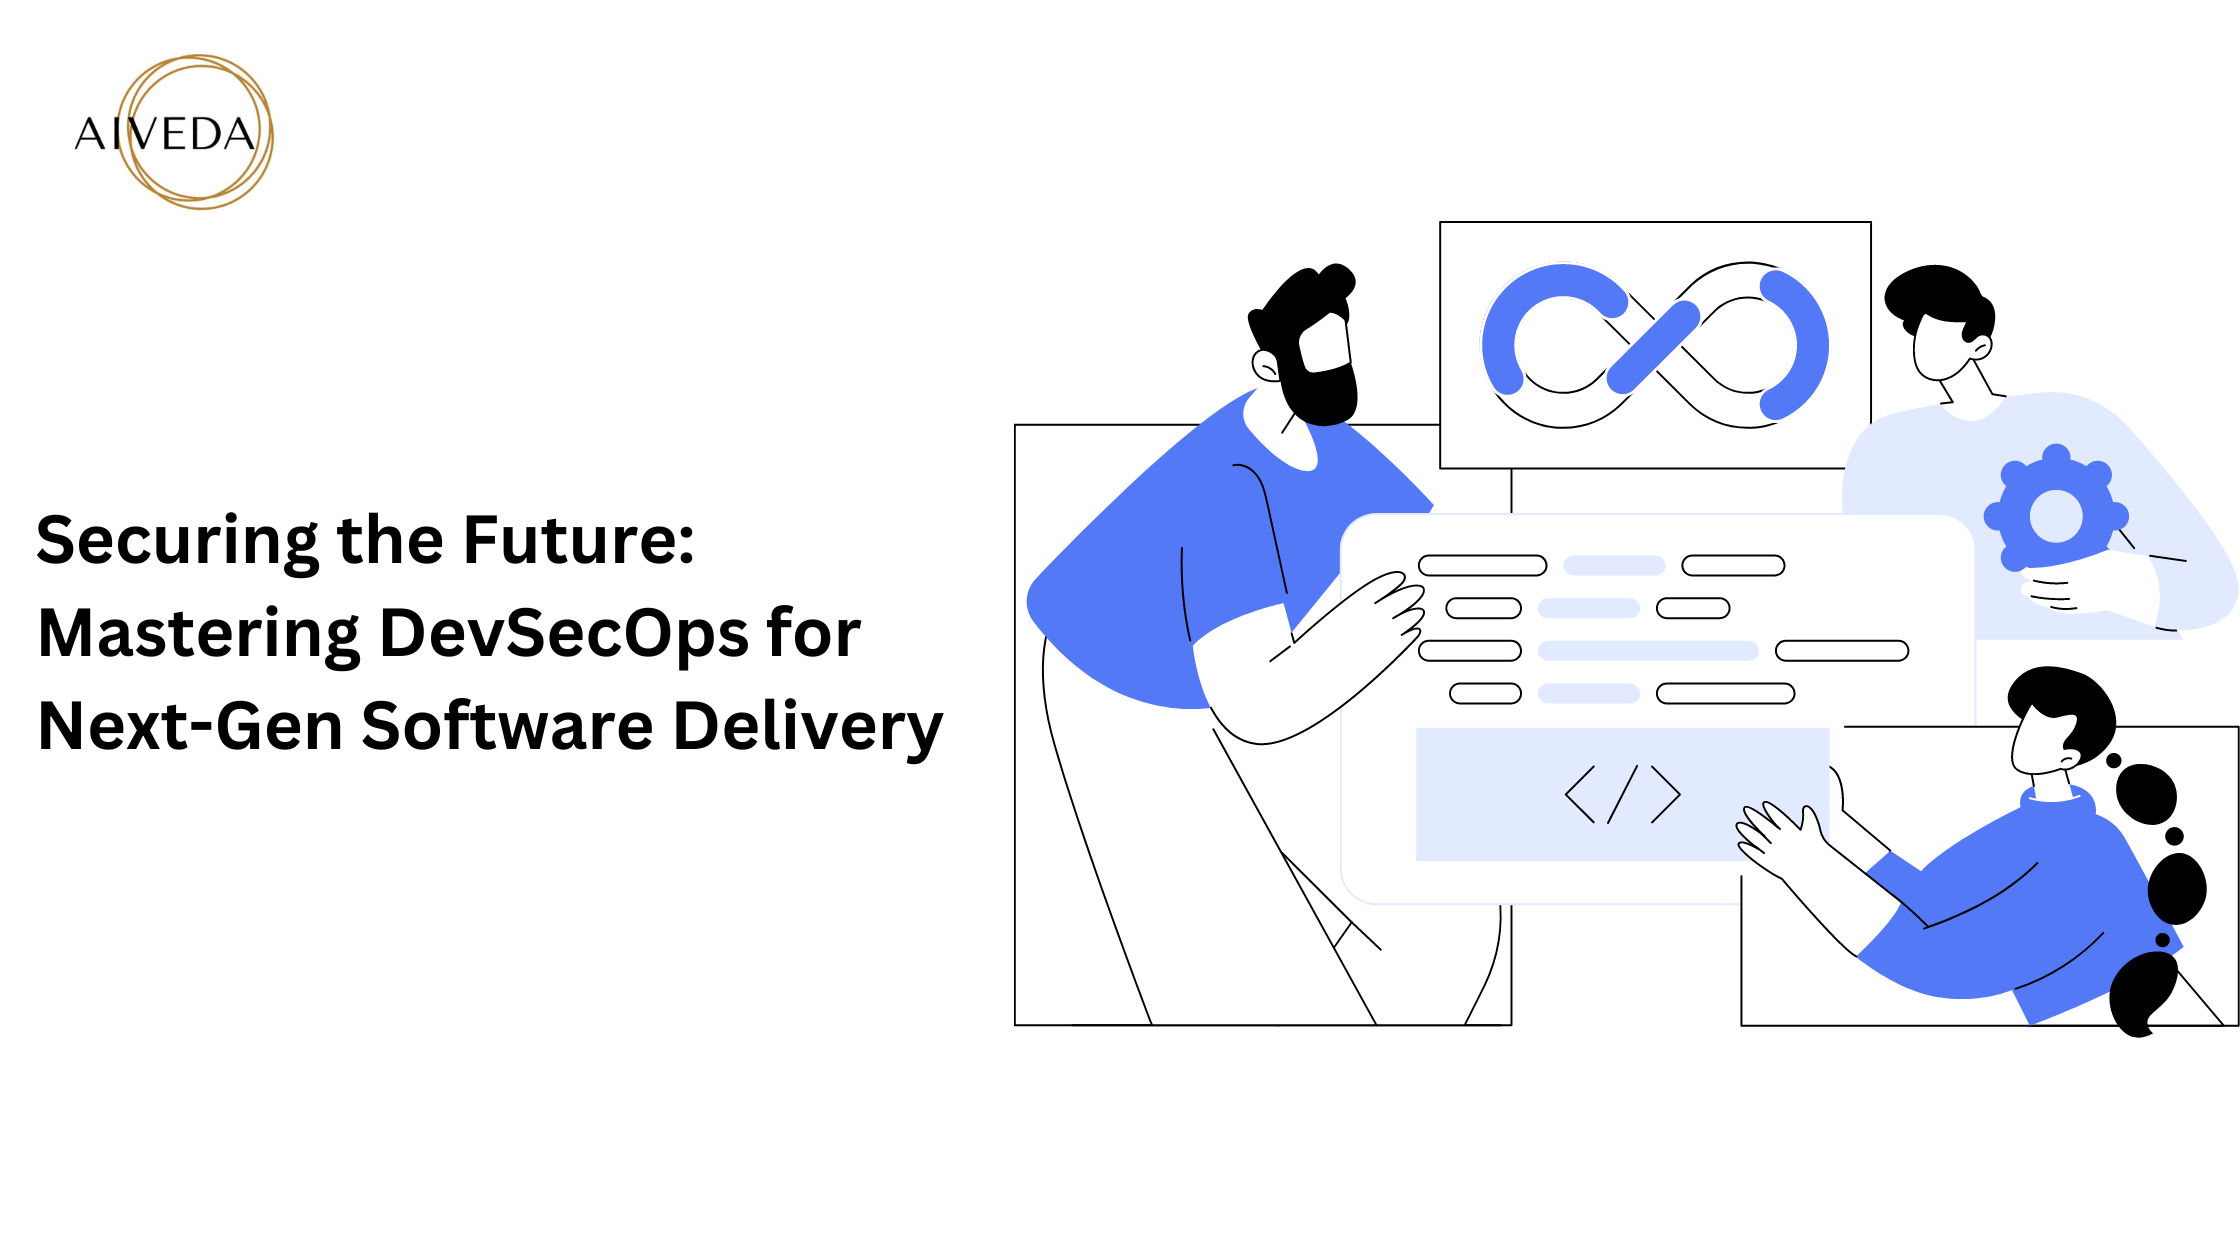 Securing the Future: Mastering DevSecOps for Next-Gen Software Delivery